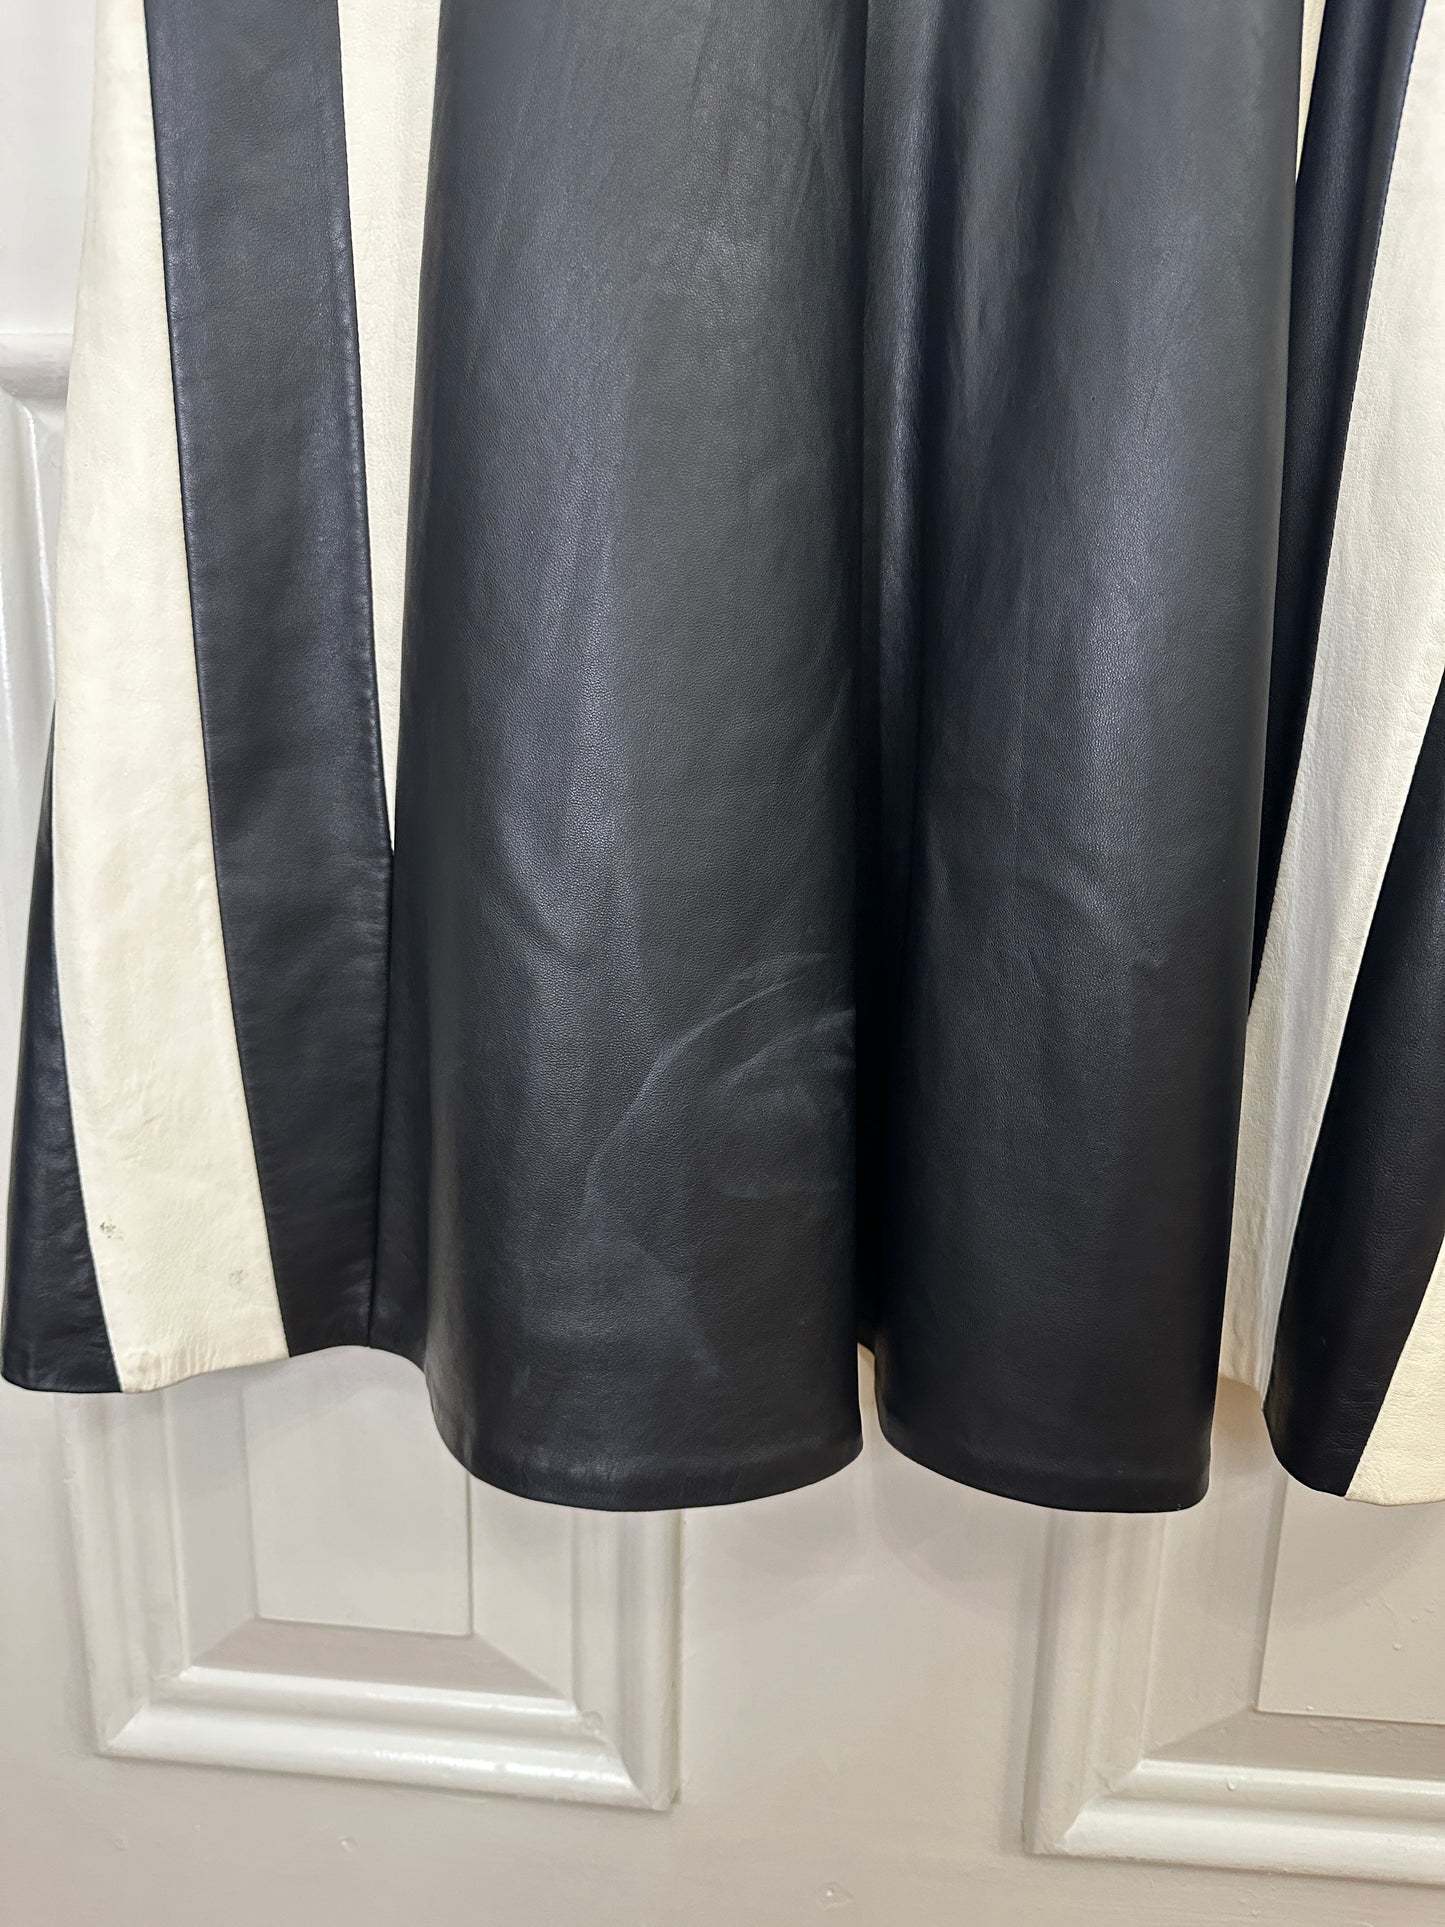 PRITCH London Leather Skirt Size S/M